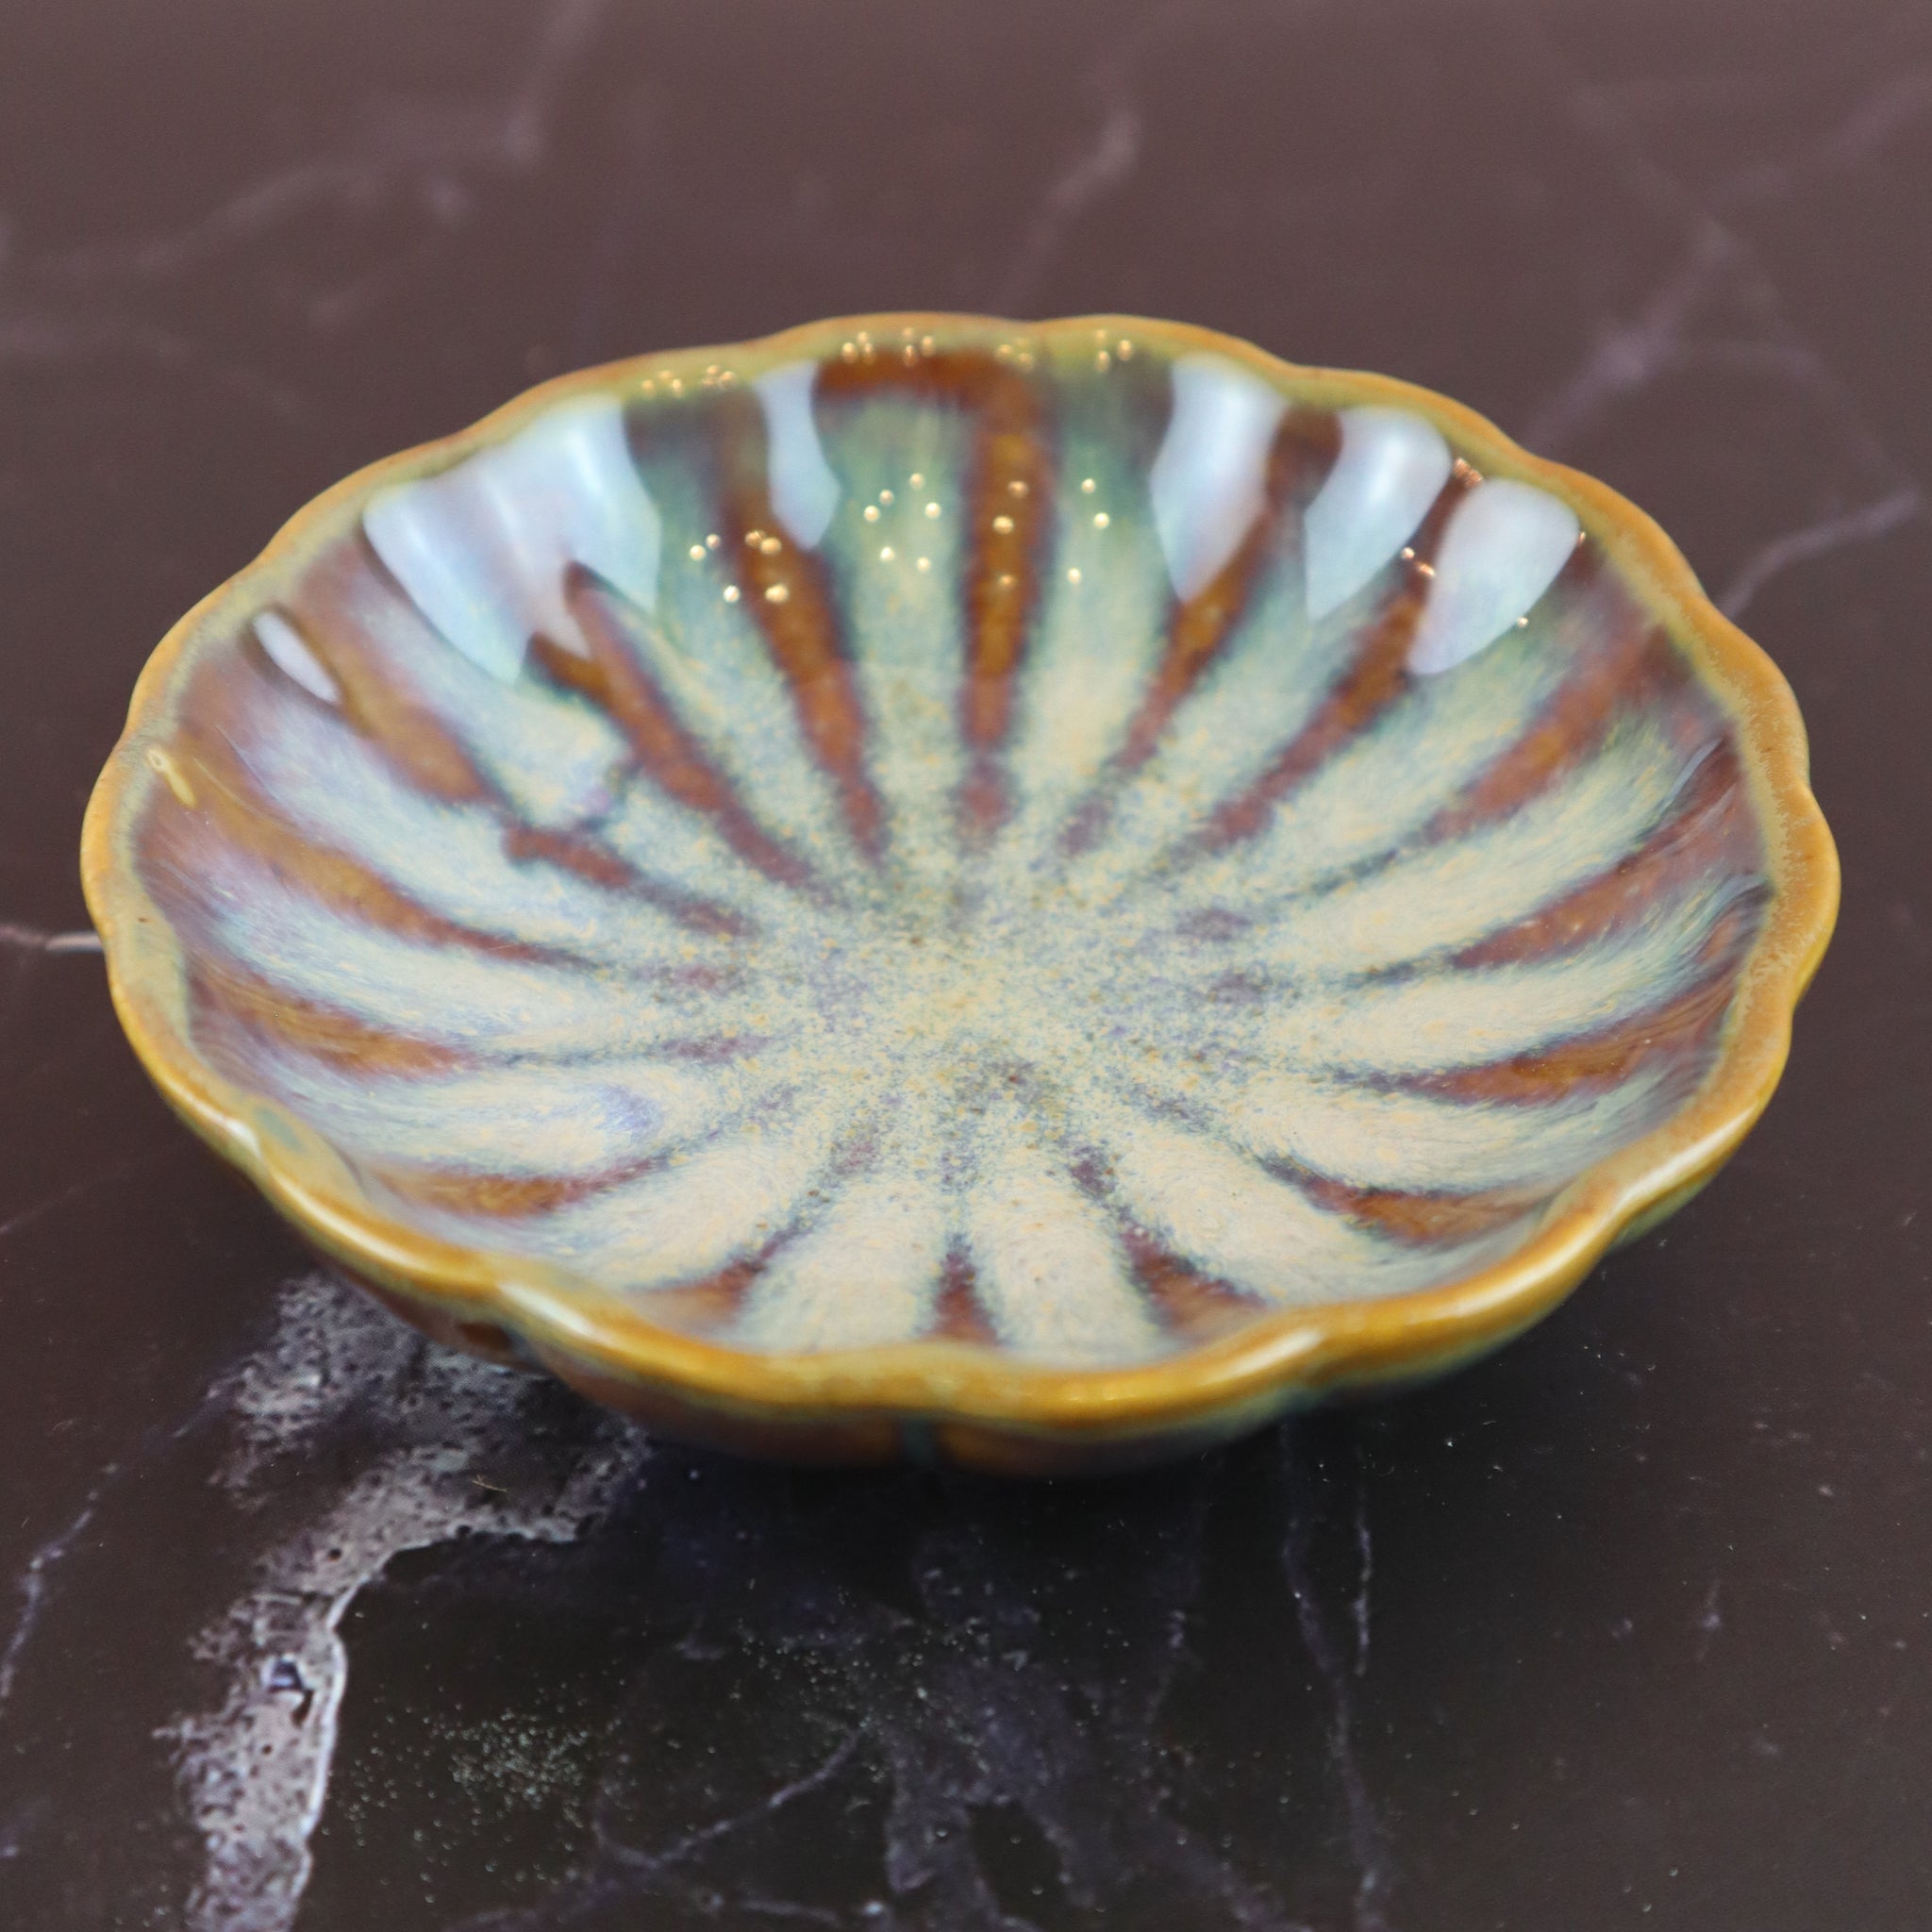 VIETNAMESE CHRYSANTHEMUM SMALL DISH - MOTHER OF PEARL OMBRE (TRINKET DISH, KOBACHI BOWL, SPICE DISH, ACCESSORY DECOR)